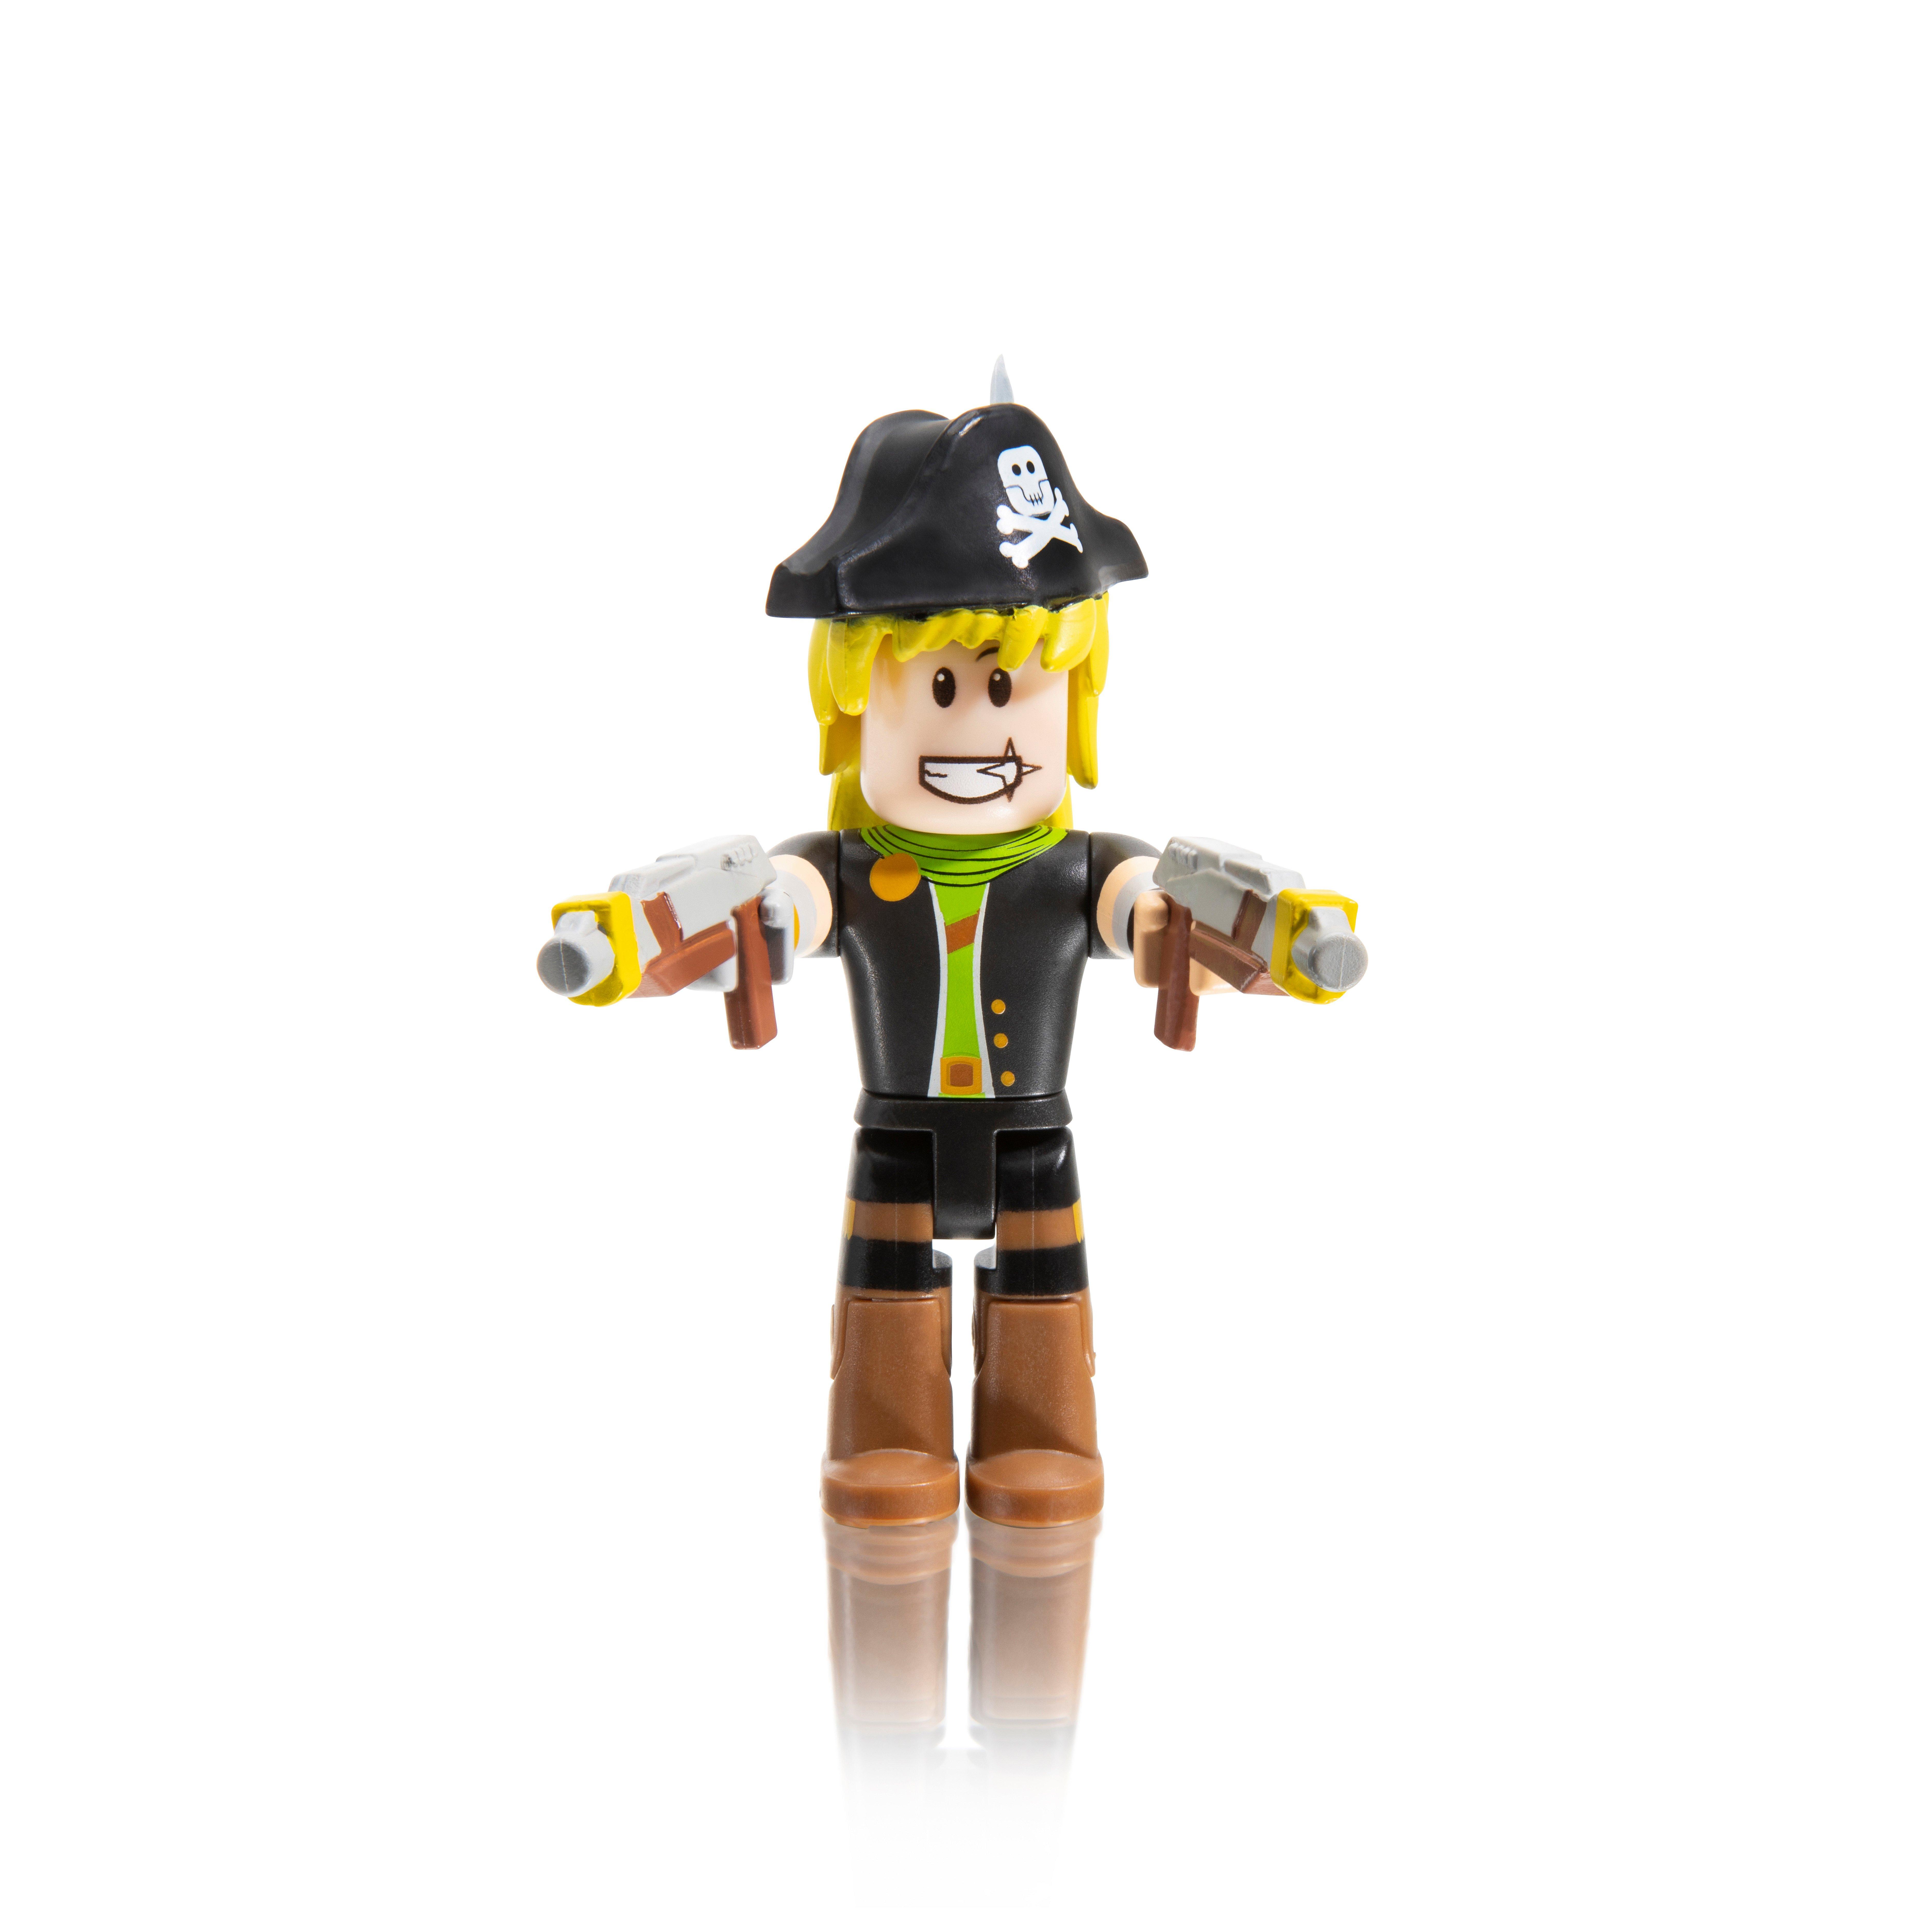 Roblox Action Collection Series 7 Mystery Figure Includes 1 Figure And Exclusive Virtual Item Gamestop - roblox series 4 checklist